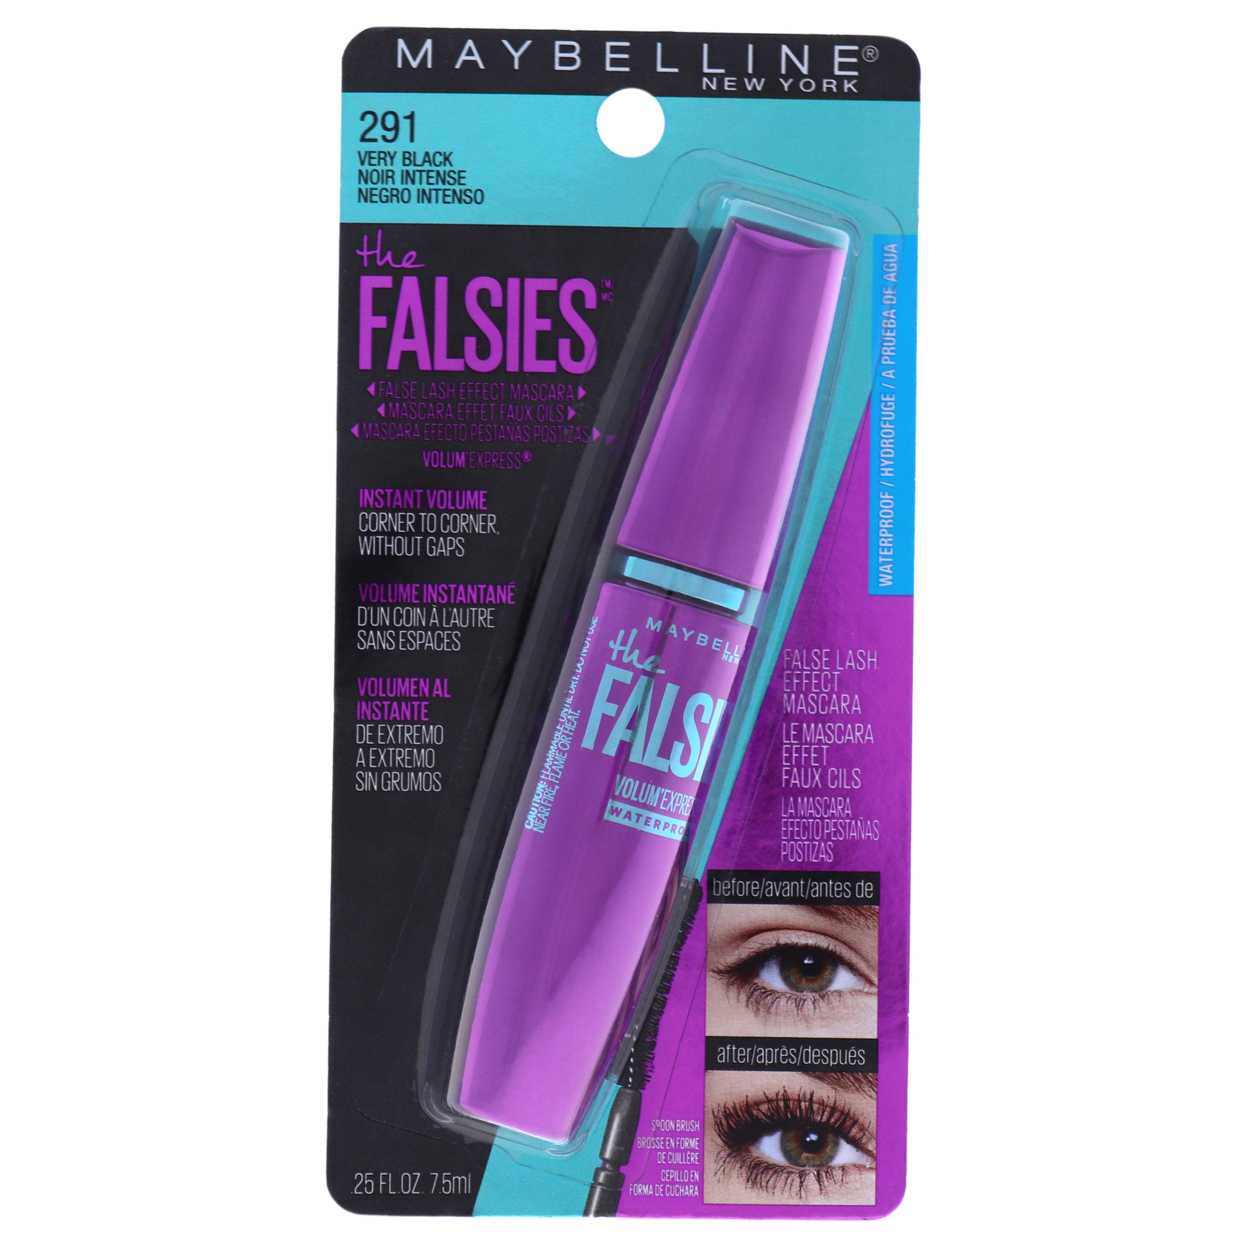 Volum Express The Falsies Mascara Waterproof - 291 Very Black by Maybelline for Women - 0.25 oz Mascara - image 1 of 18